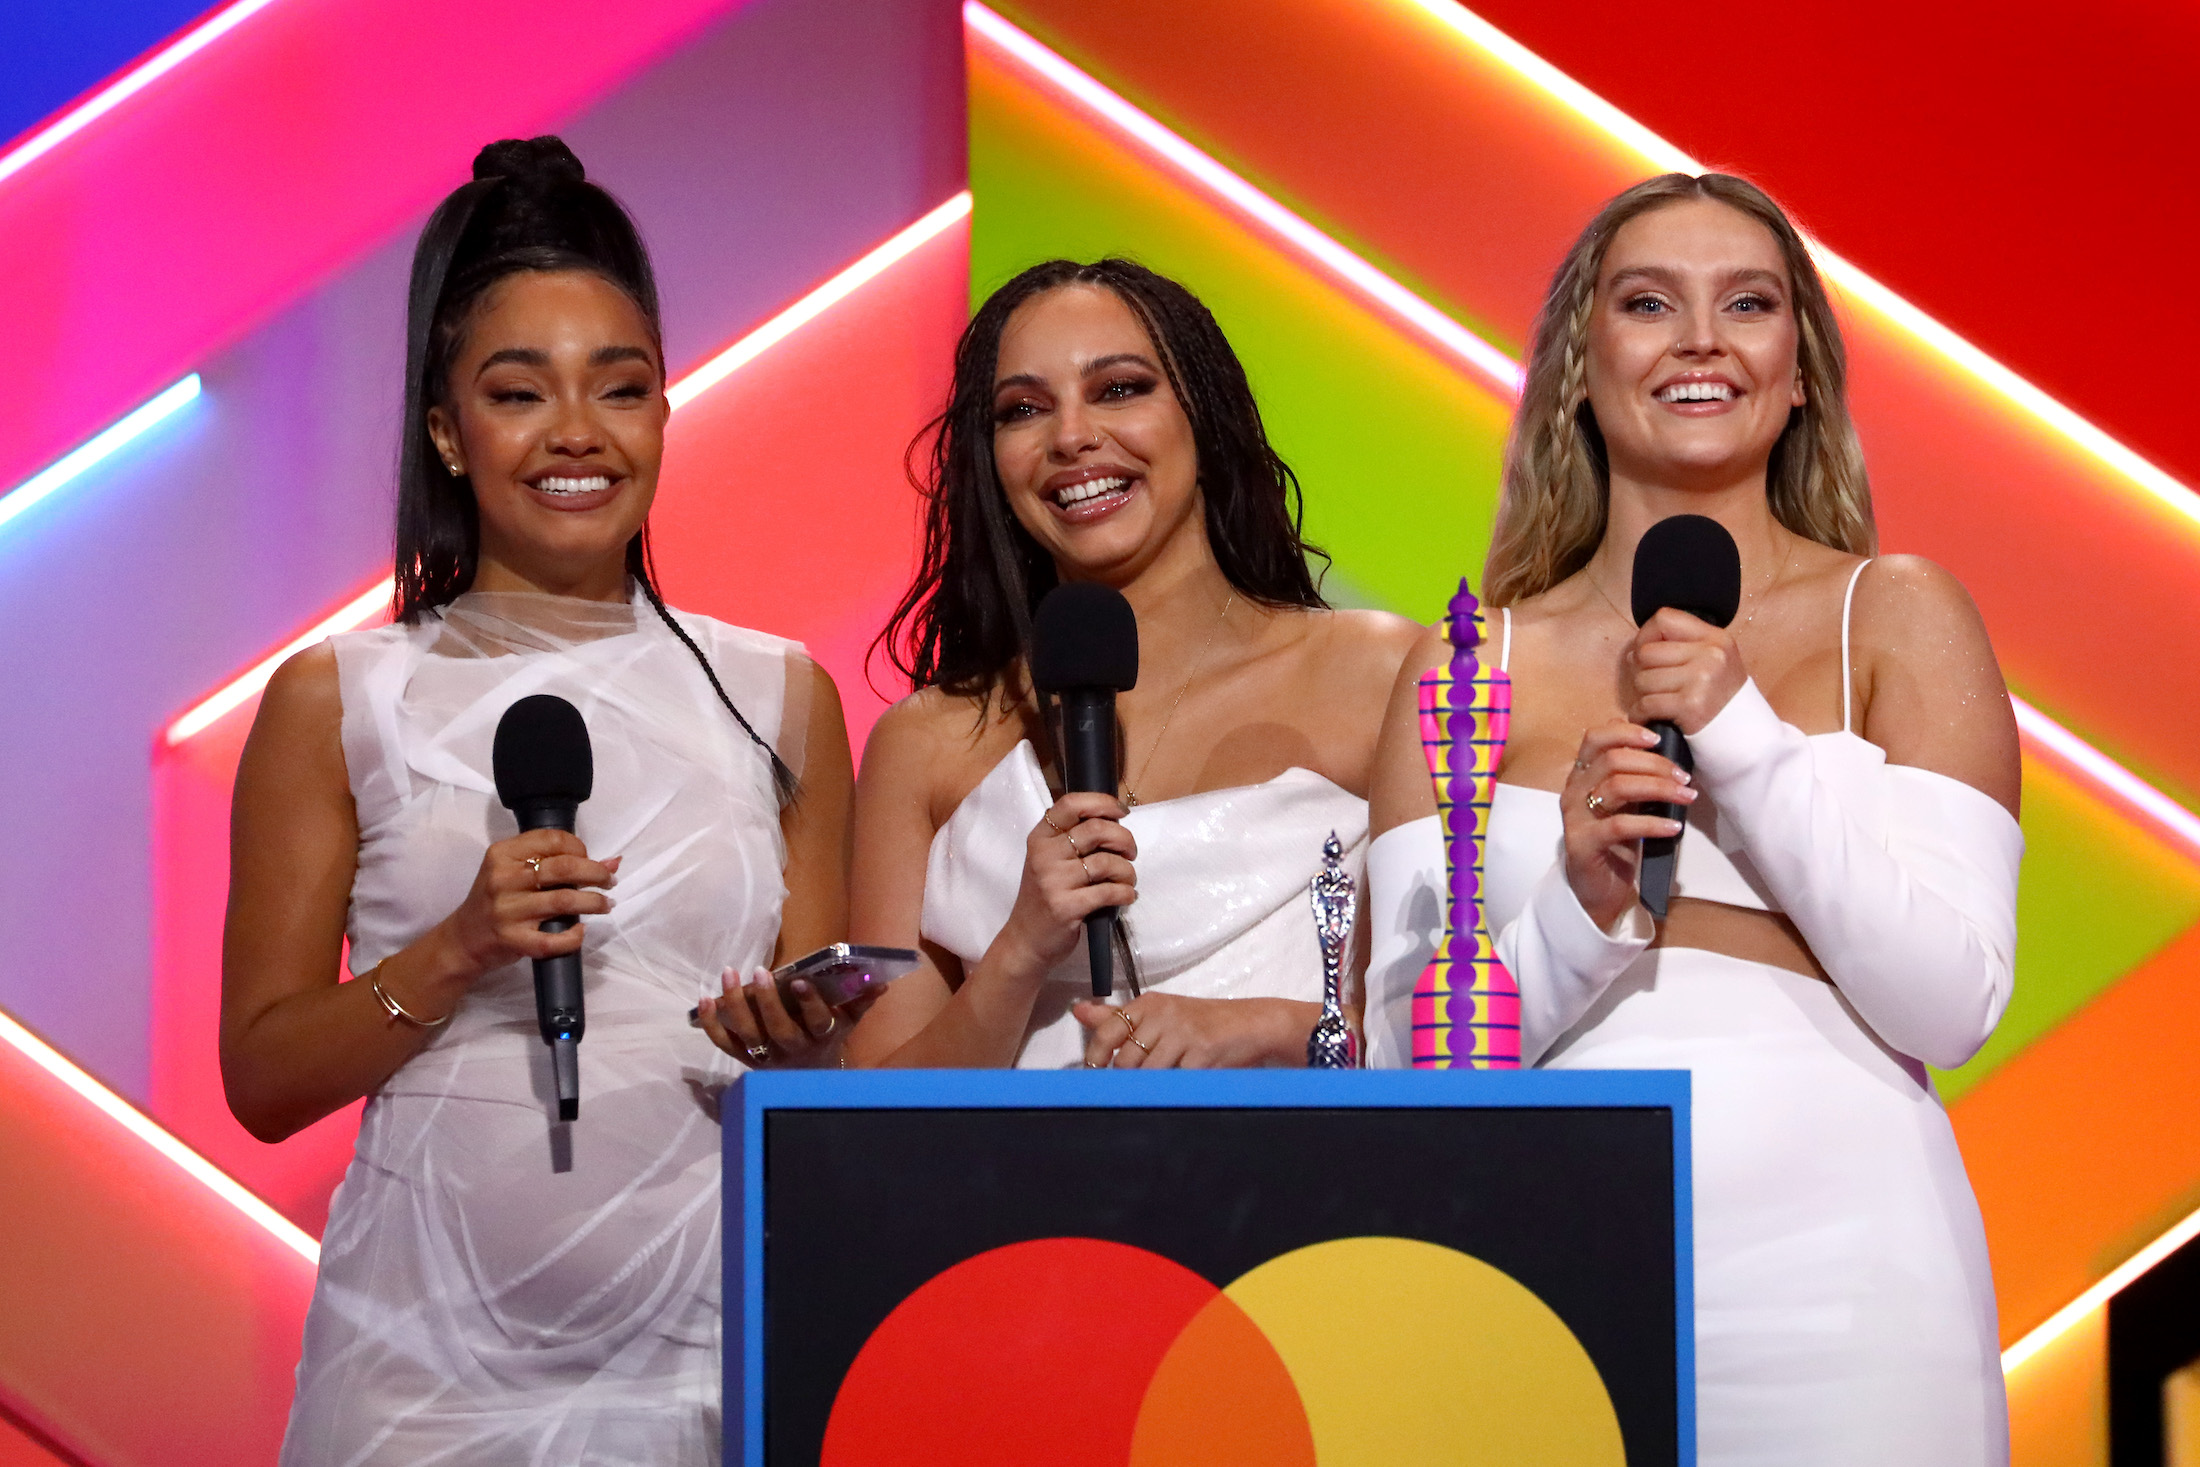 Leigh-Anne Pinnock, Jade Thirlwall and Perrie Edwards of Little Mix presenting an award